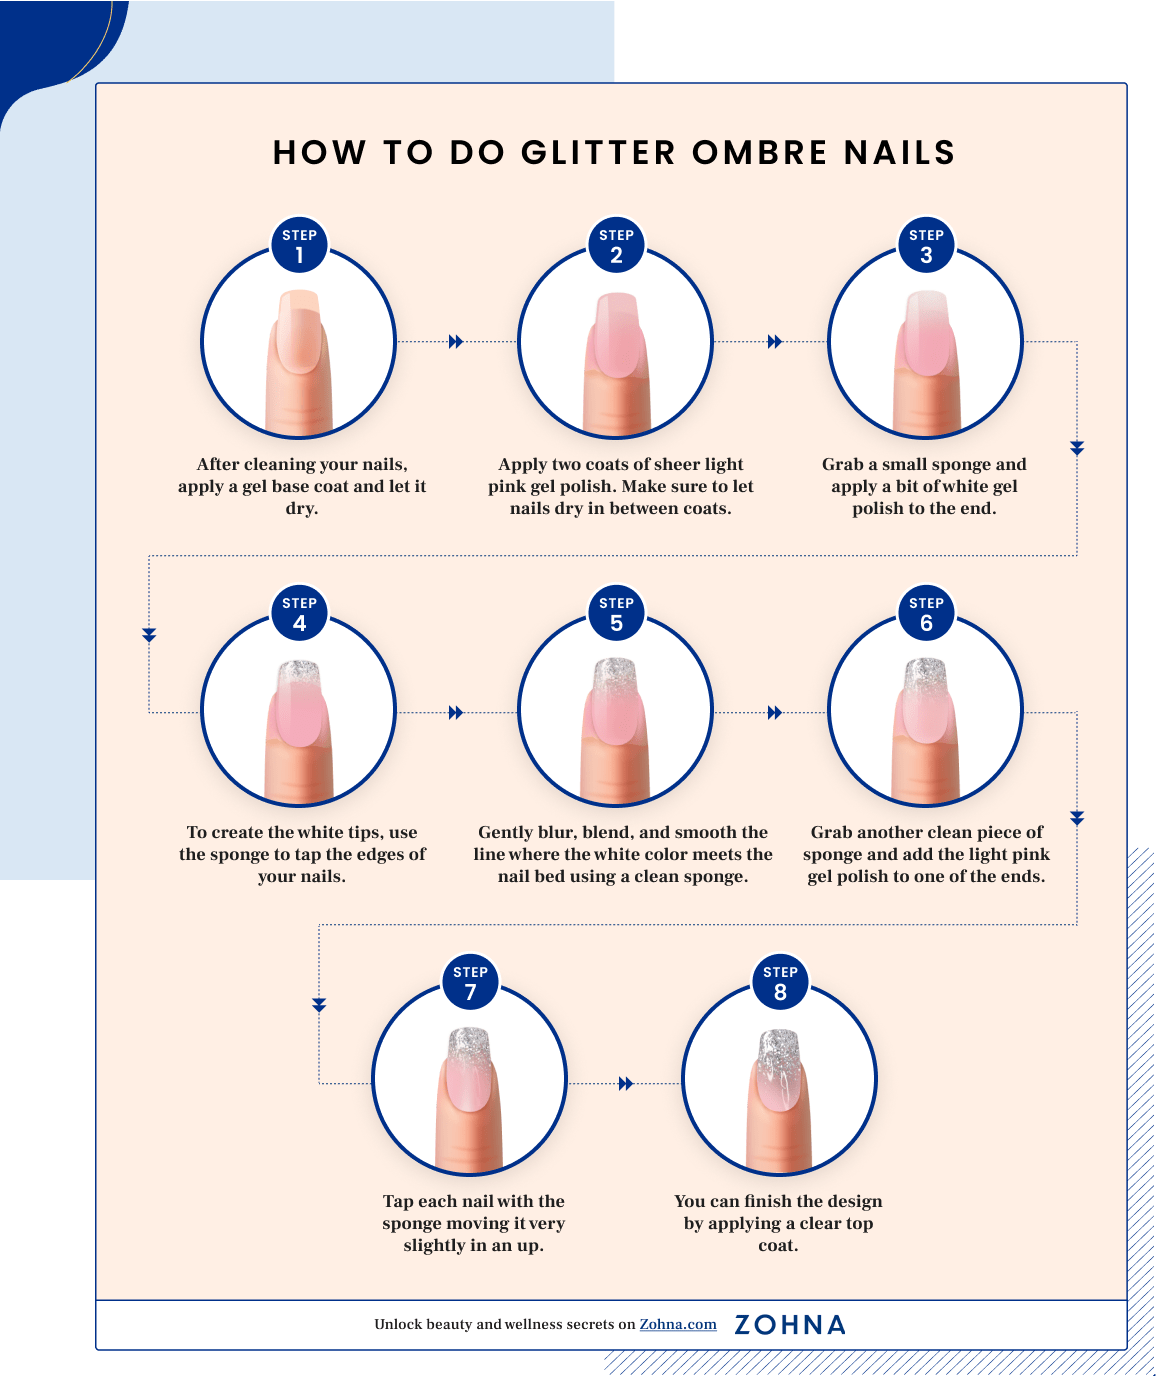 How to Do Glitter Ombre Nails